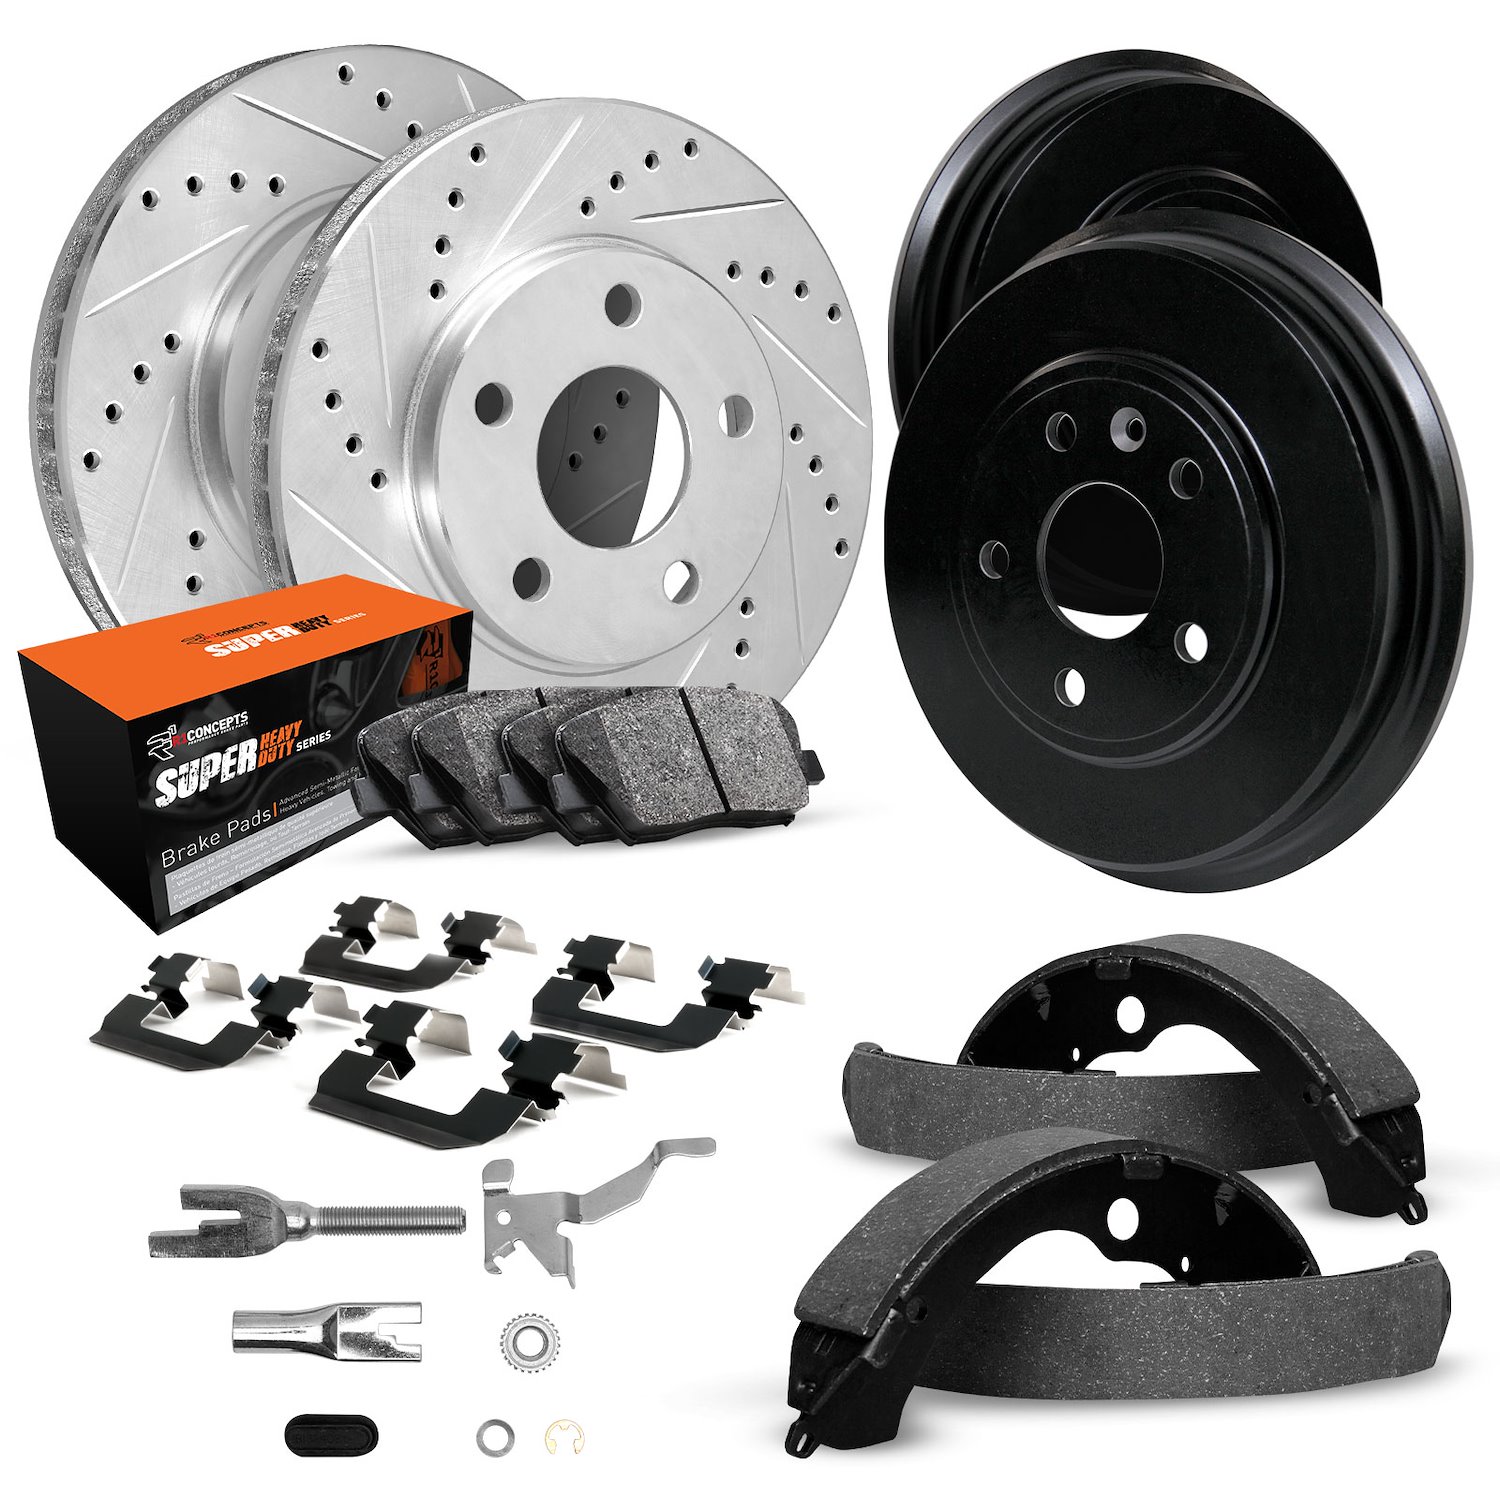 E-Line Drilled/Slotted Silver Rotor & Drum Set w/Super-Duty Pads, Shoes/Hardware/Adjusters, 1993-1996 Mopar